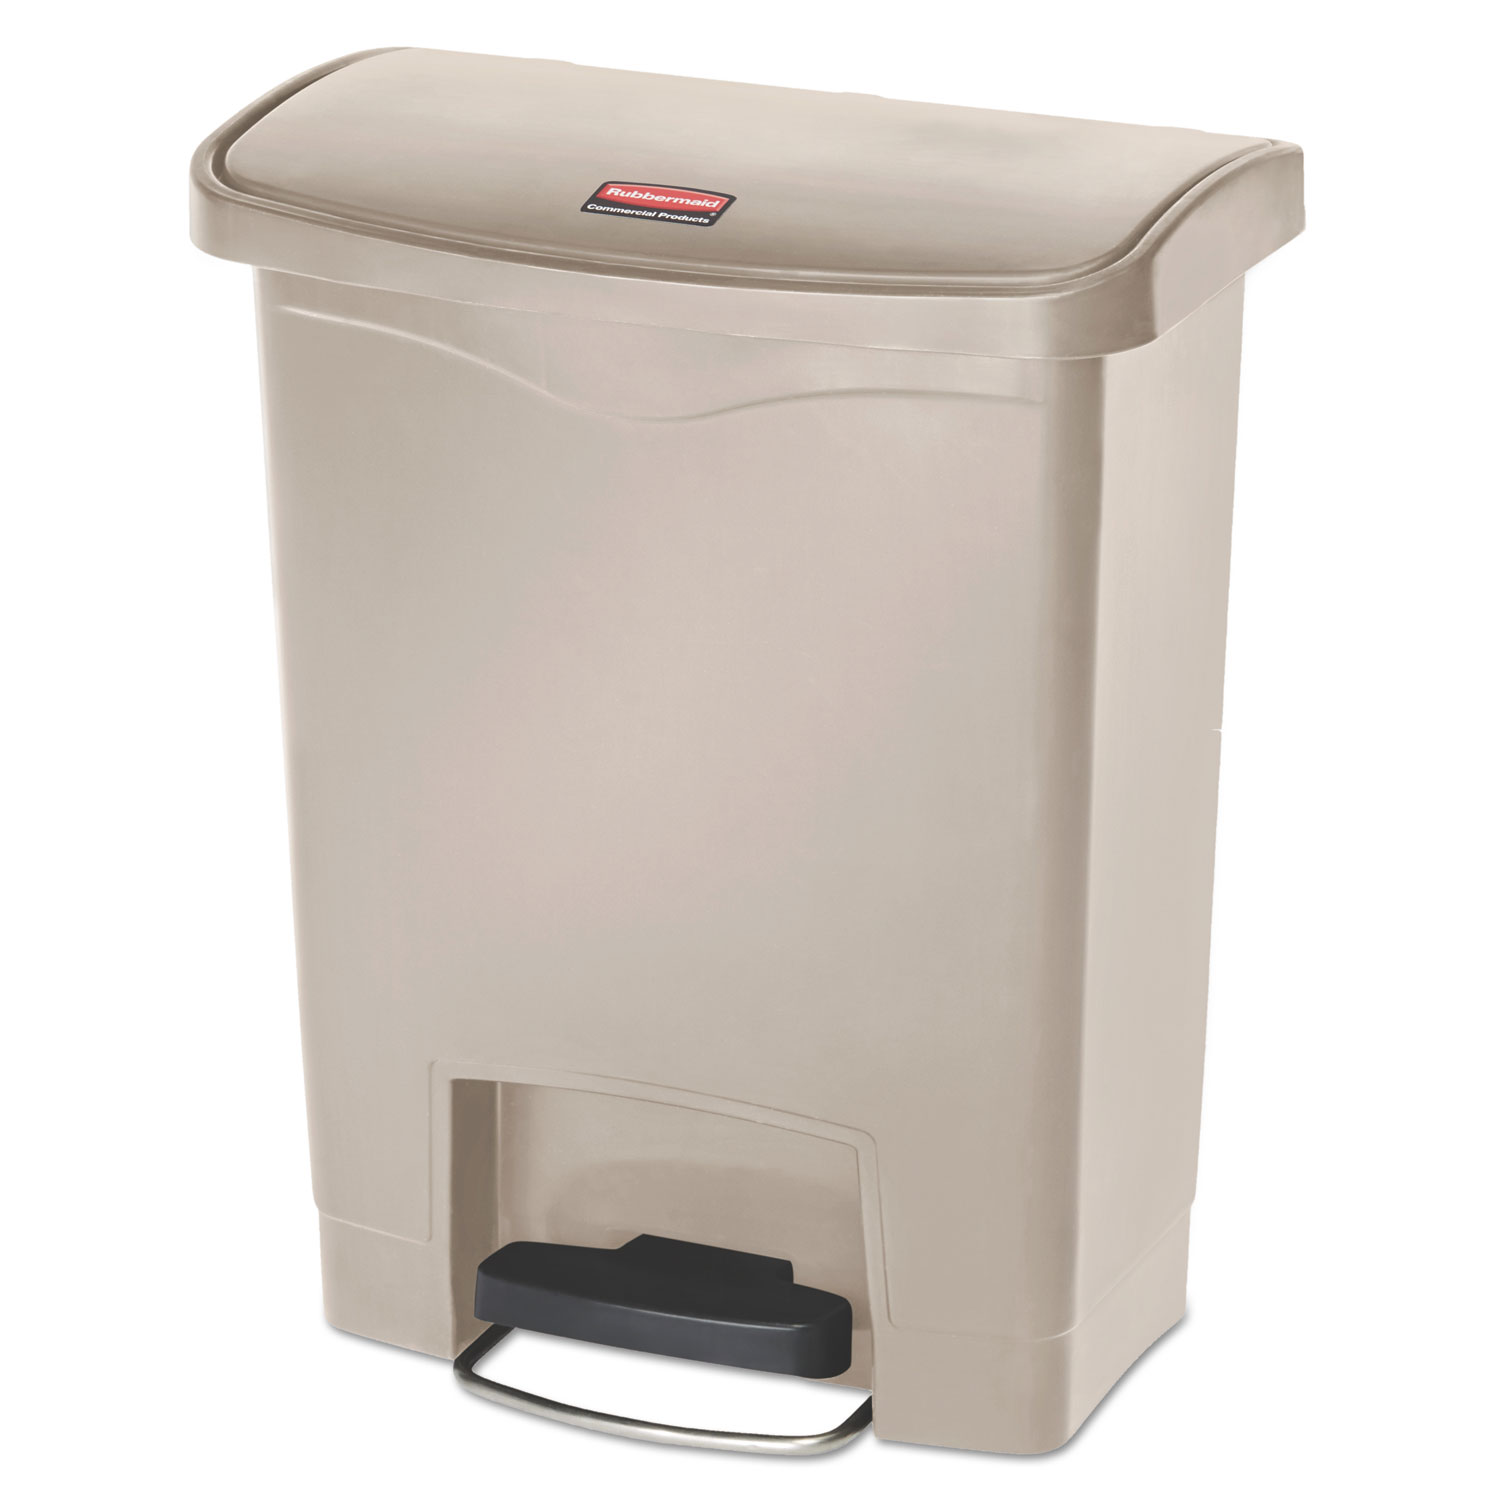  Rubbermaid Commercial 1883456 Slim Jim Resin Step-On Container, Front Step Style, 8 gal, Beige (RCP1883456) 